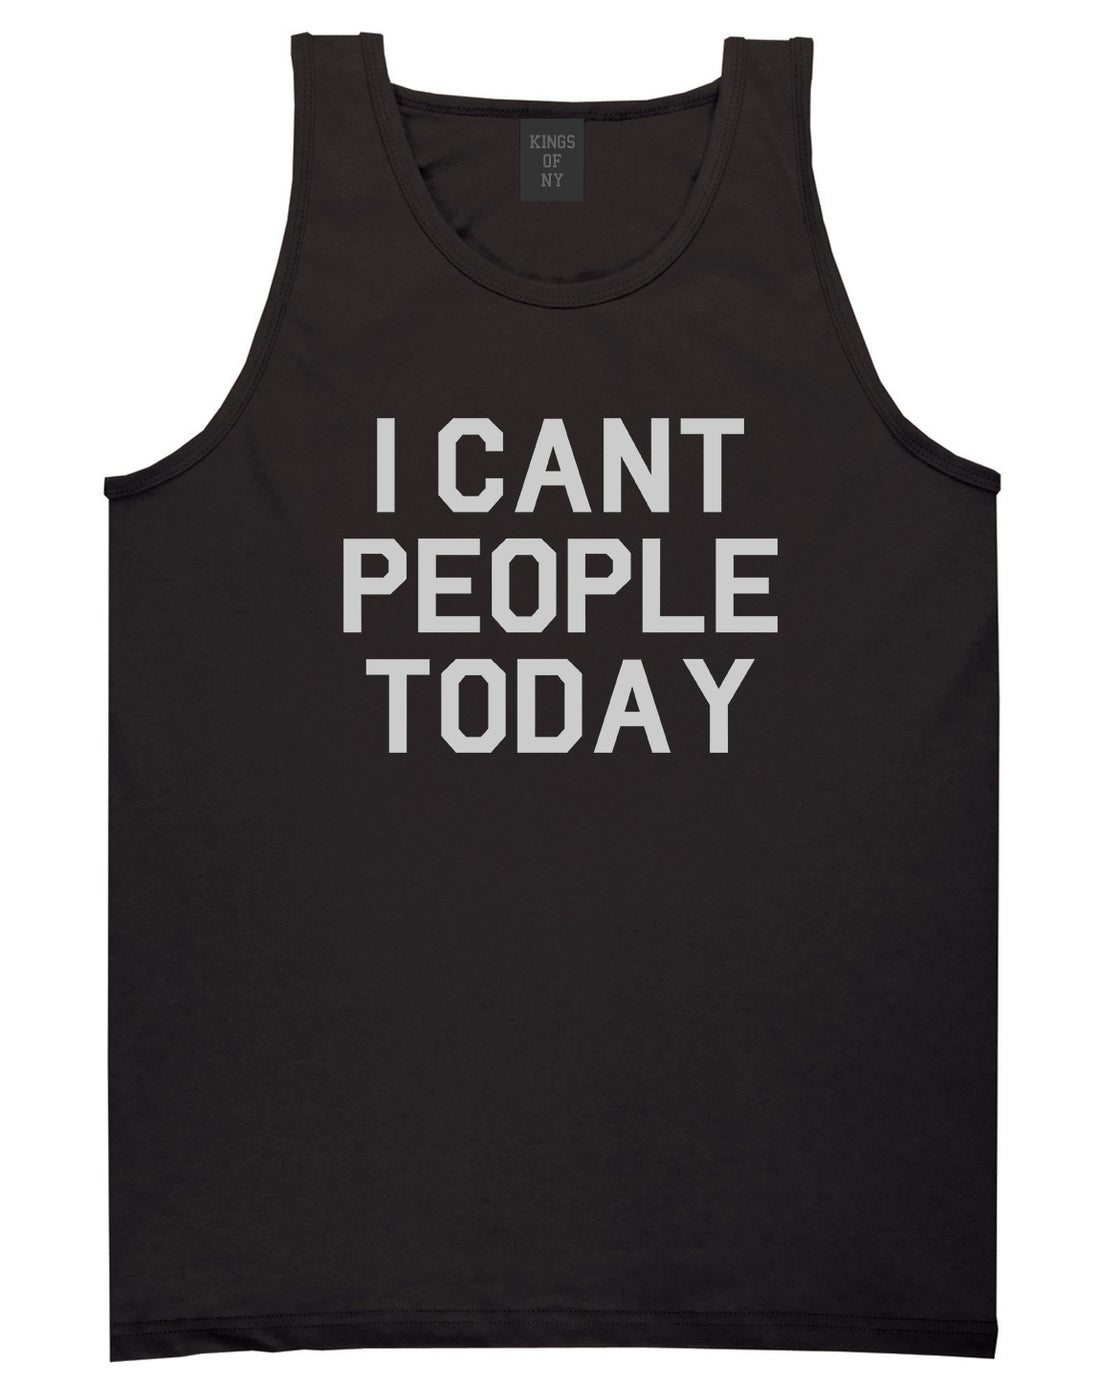 I Cant People Today Funny Mens Tank Top Shirt Black